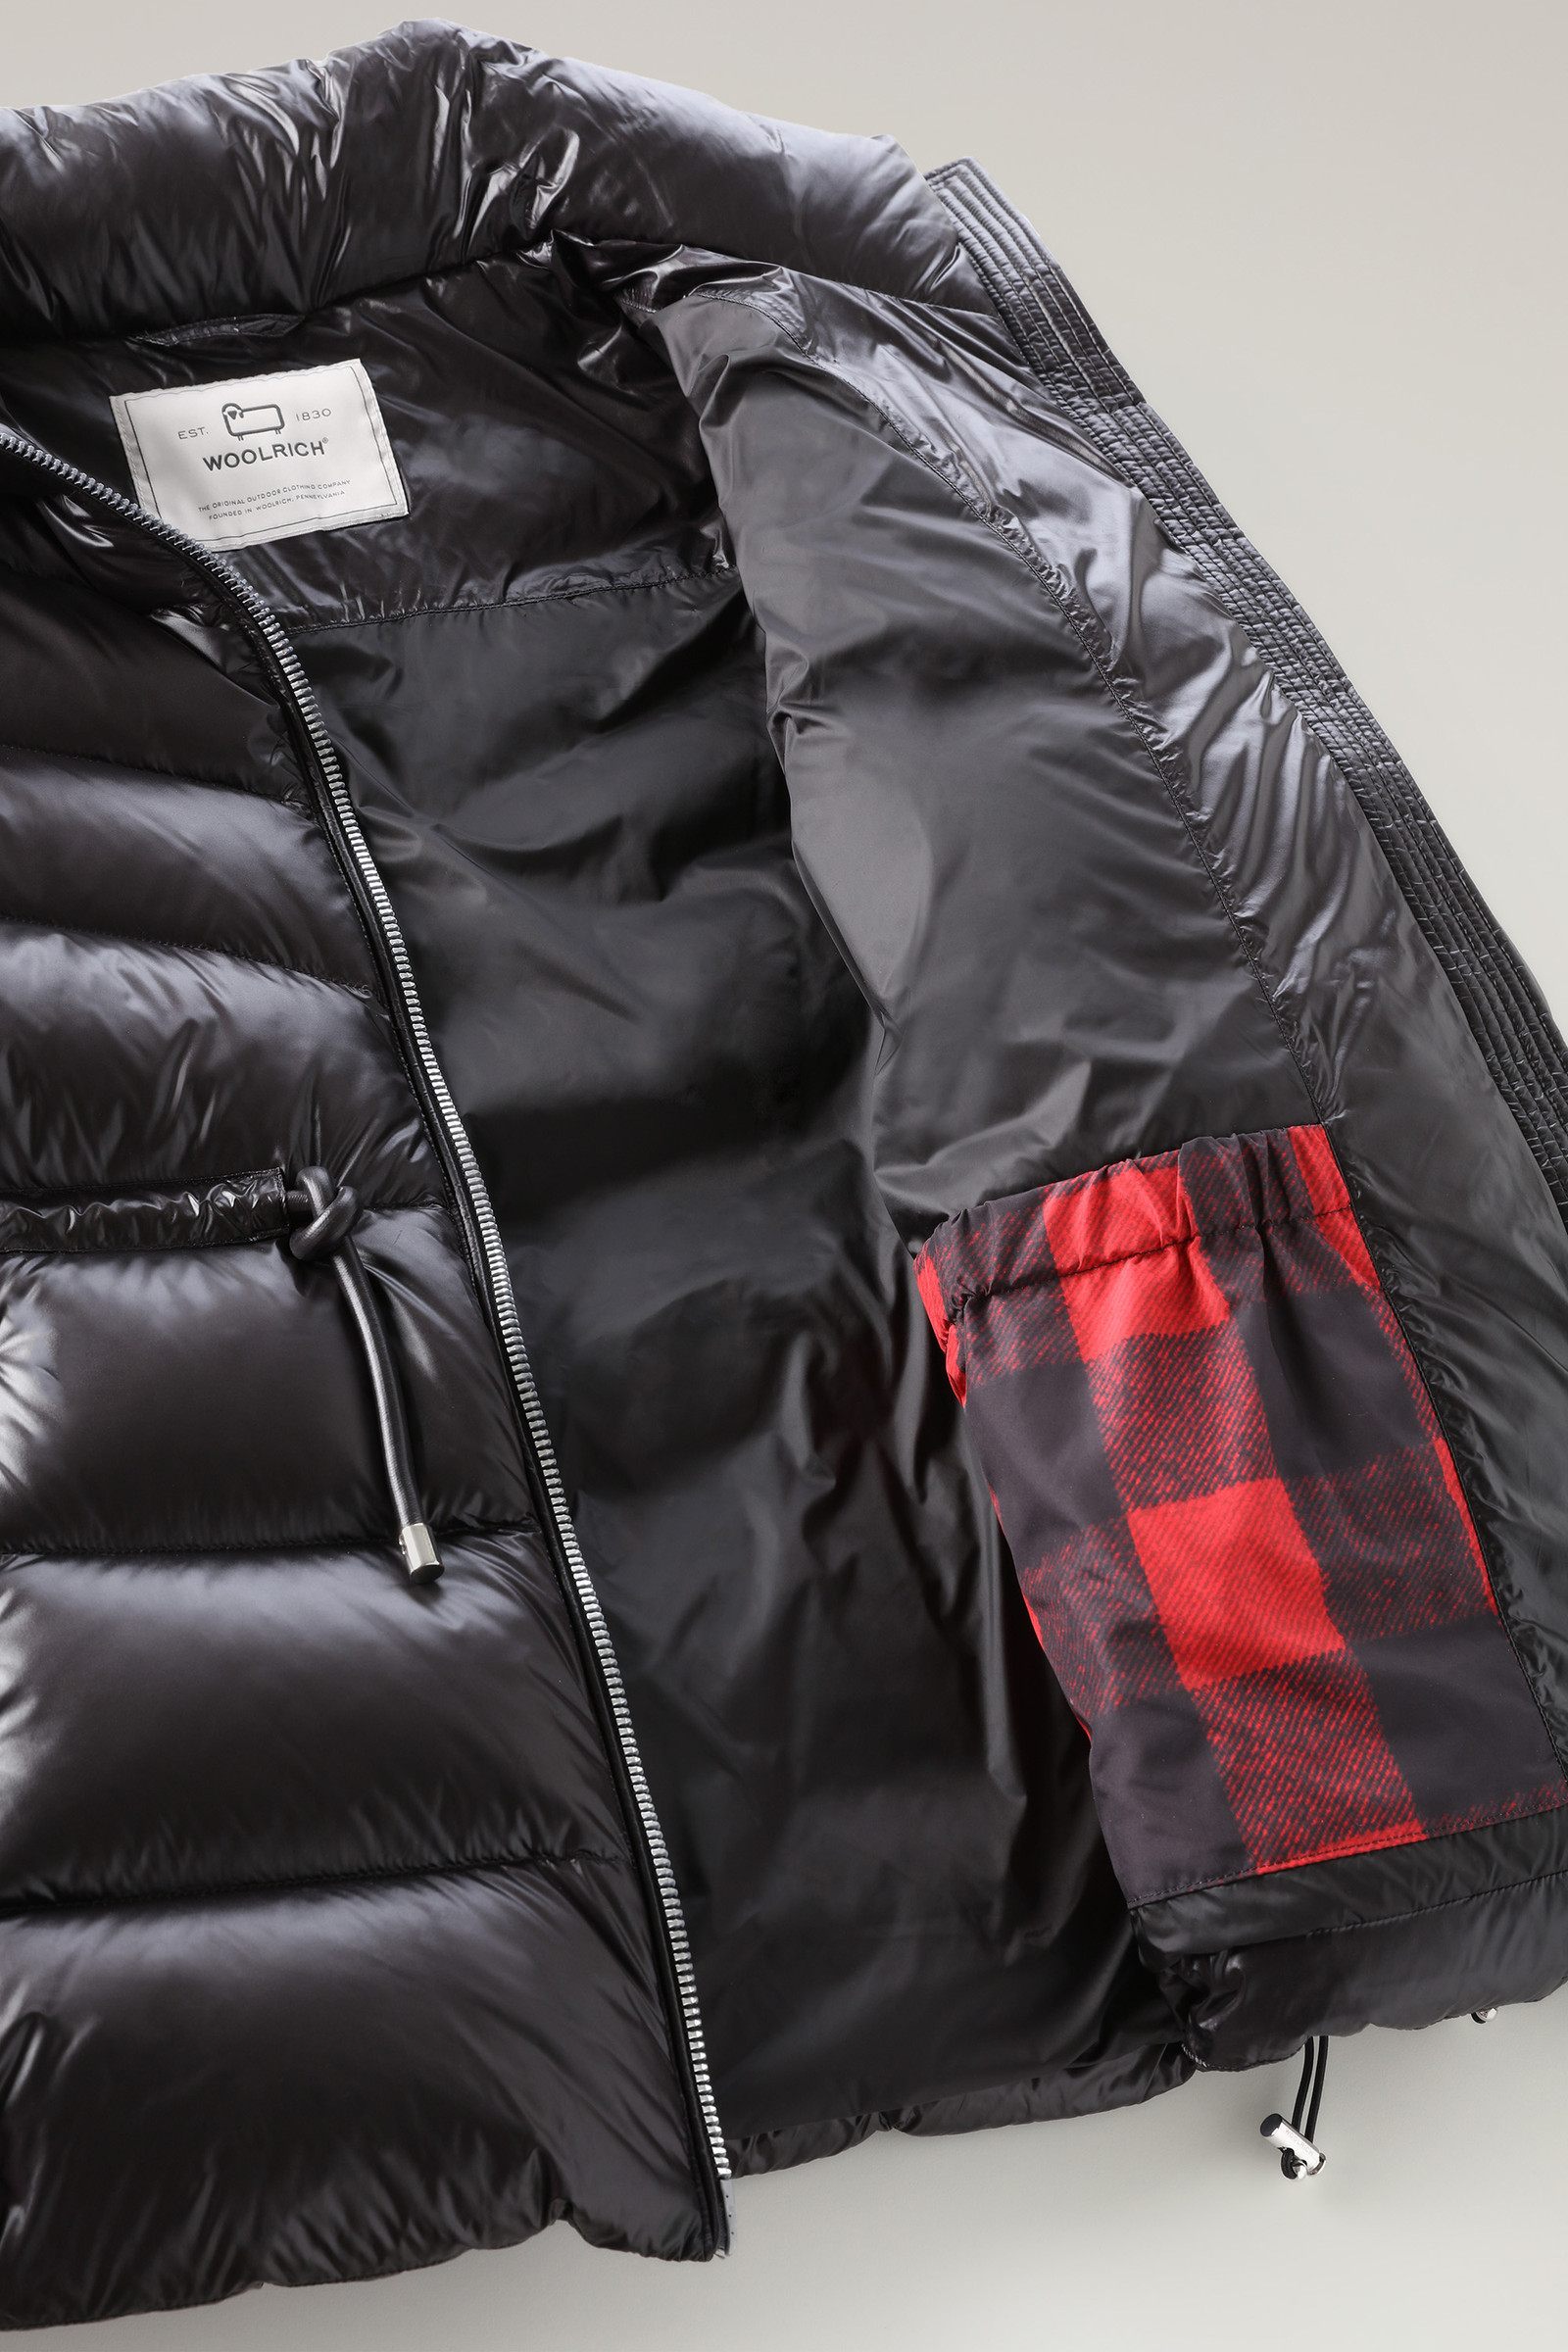 Women's Aliquippa Down Jacket in Glossy Nylon with a Drawstring